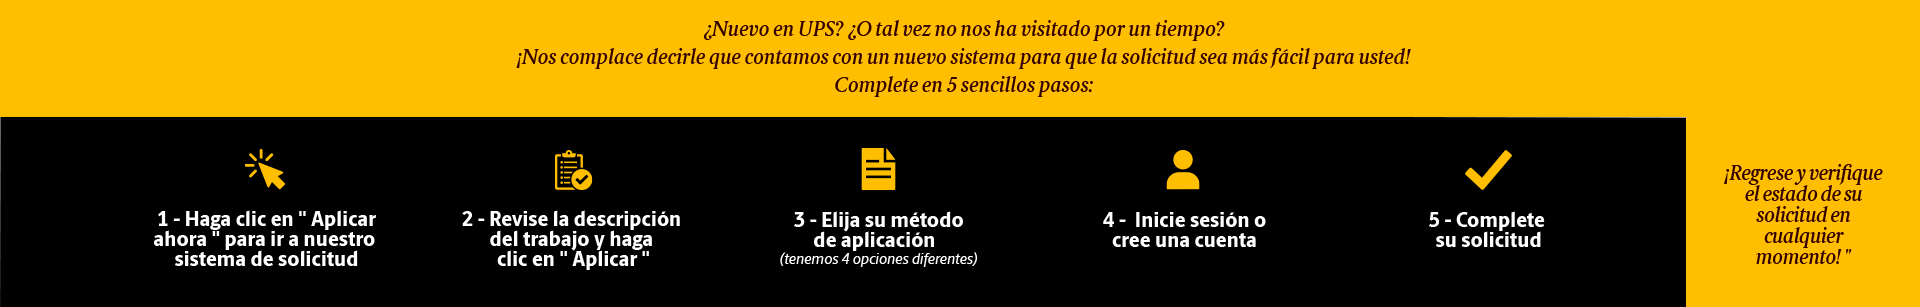 New to UPS? or Maybe you haven't stopped by in a while?  We are happy to share that we have a new system in place to make applying easier for you! 5 Steps: (1) Click 'Search Jobs' to go to our application system. (2) Find your job & click 'Apply' (3) Choose your Application Method (4) Login or create an account (5) Complete your application. Come back & check the status of your application at any time!